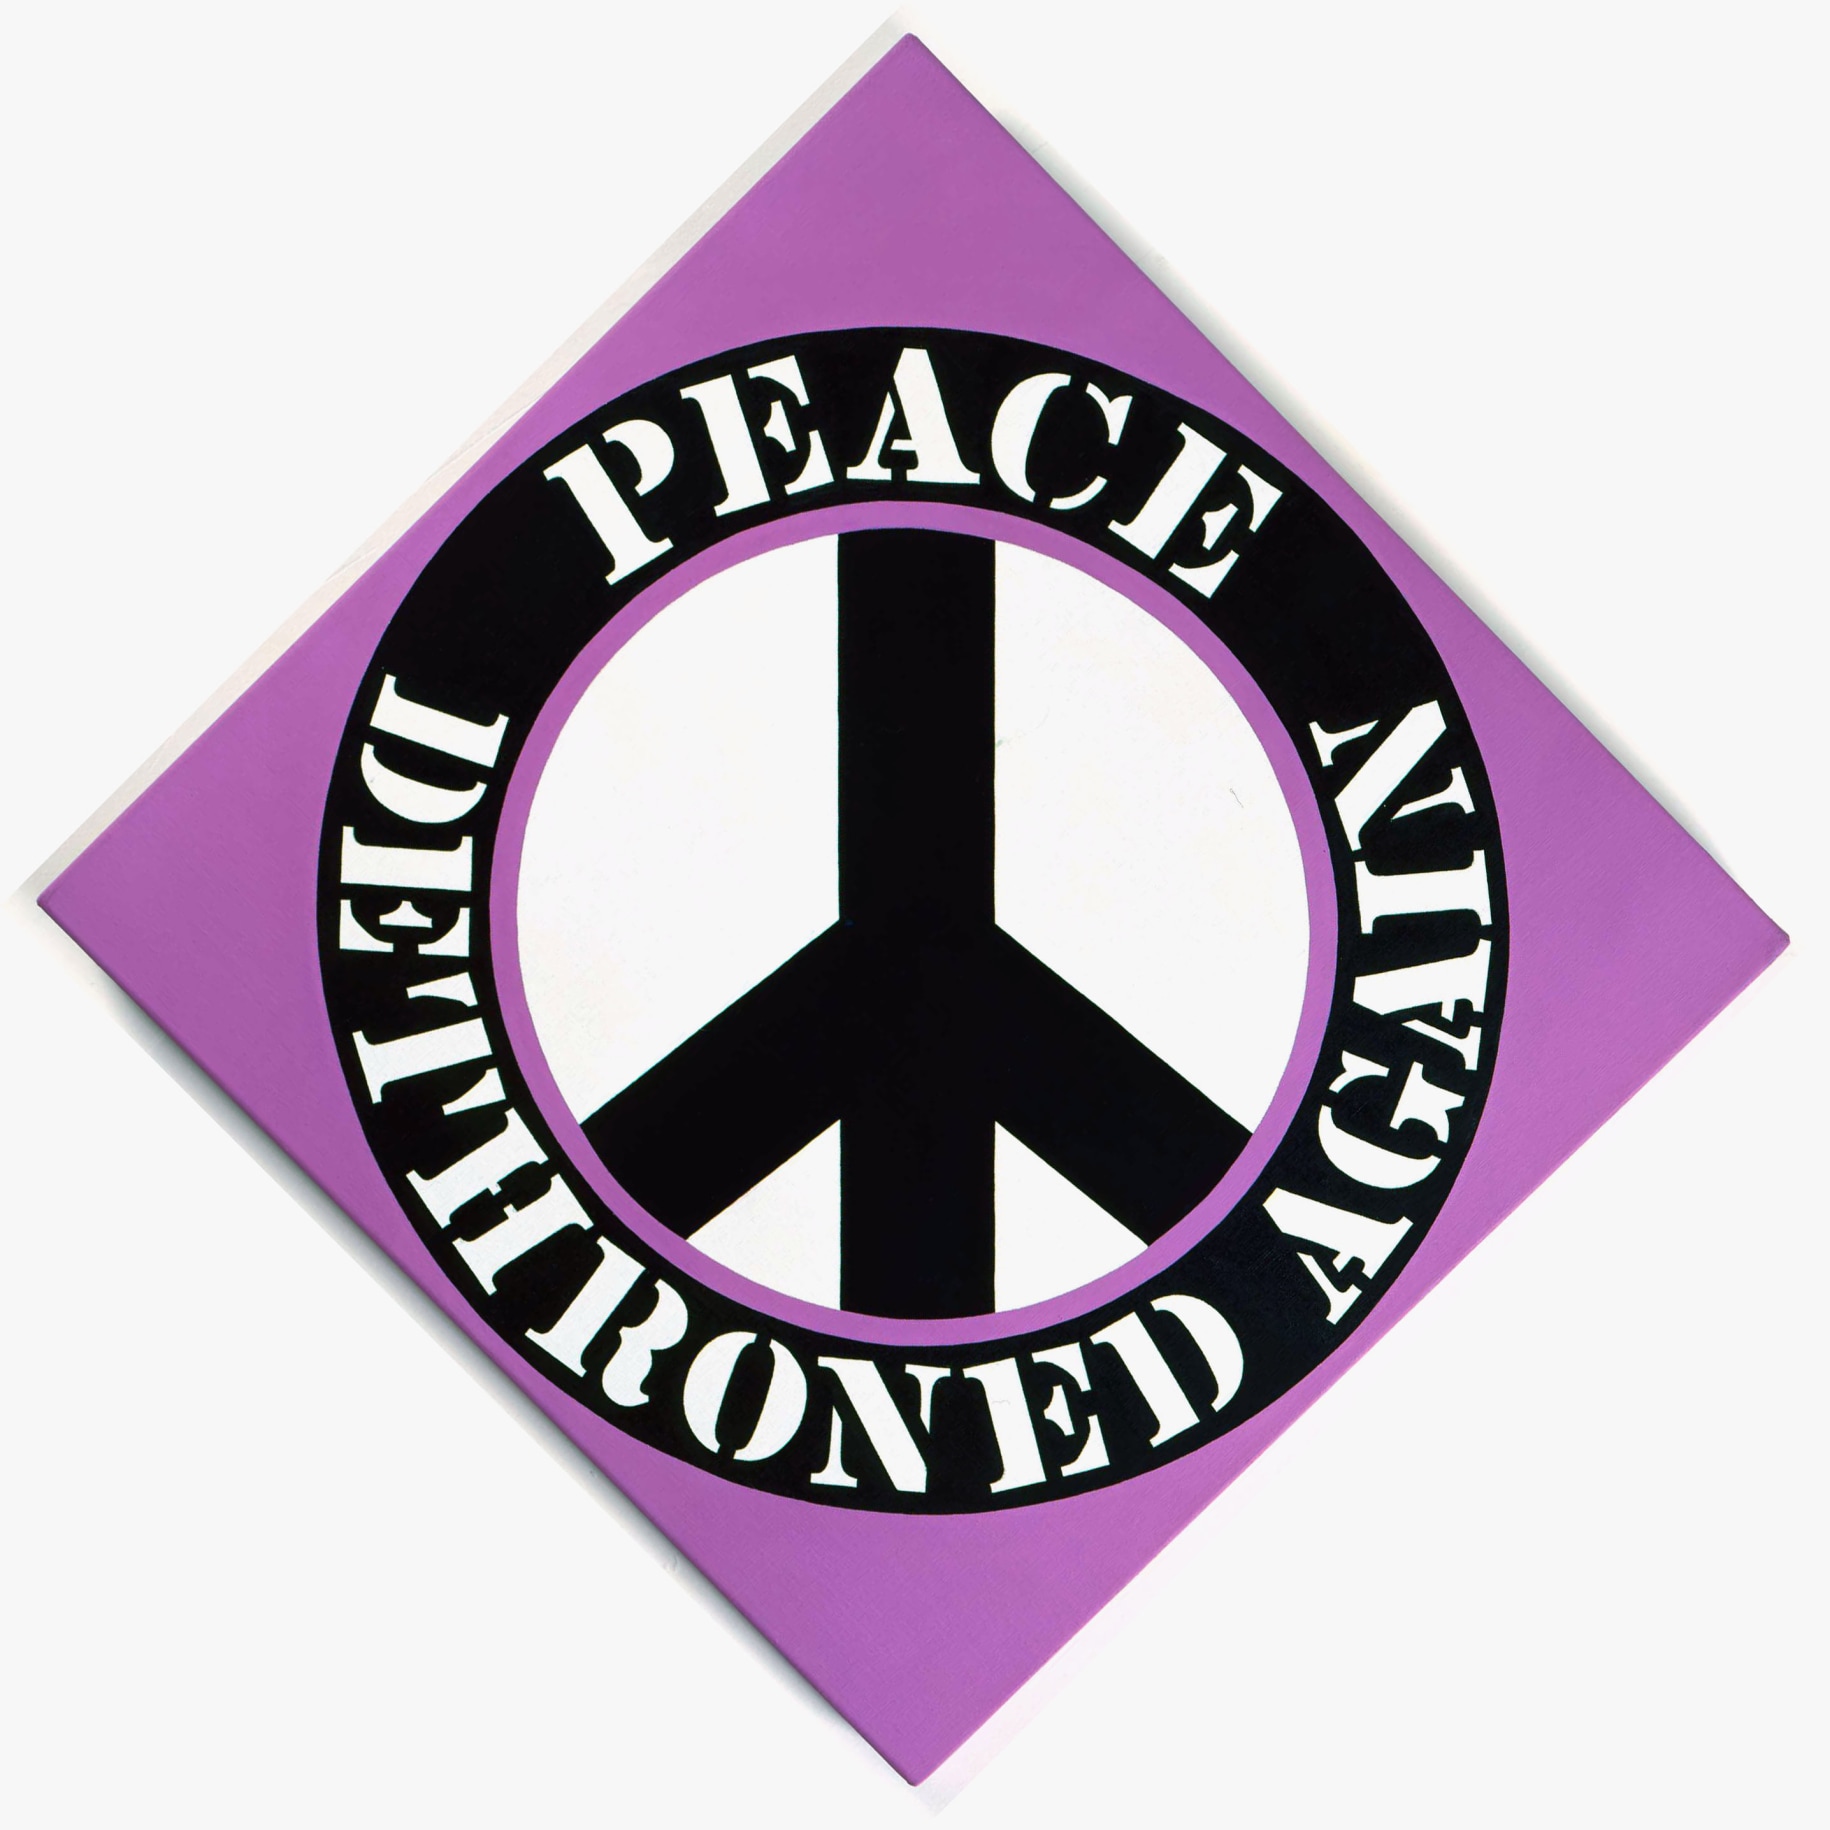 A 34 by 34 inch light purple diamond shaped canvas with a black peace sign in a white circle with a purple outline. Surrounding the circle is a black ring with the painting's title, &quot;Peace Dethroned Again&quot; painted in white letters. &quot;Peace&quot; appears in the top of the ring and &quot;Dethroned Again&quot; in the bottom half.